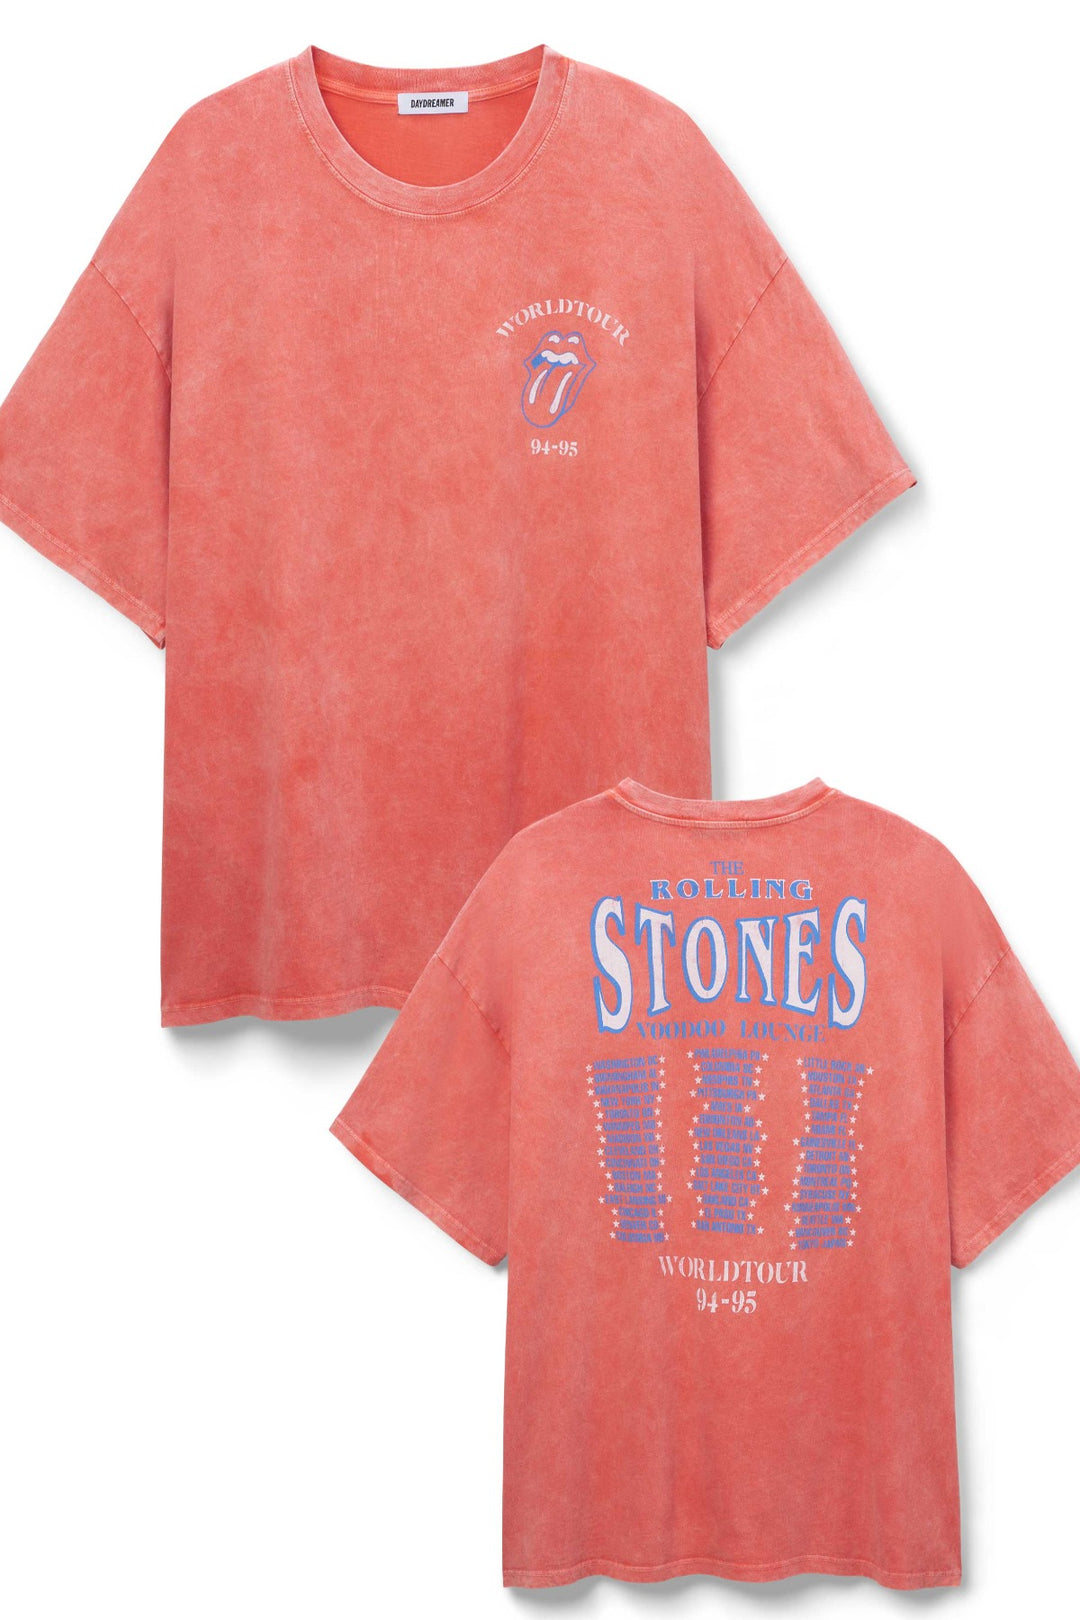 Daydreamer Rolling Stones World Tour Tee